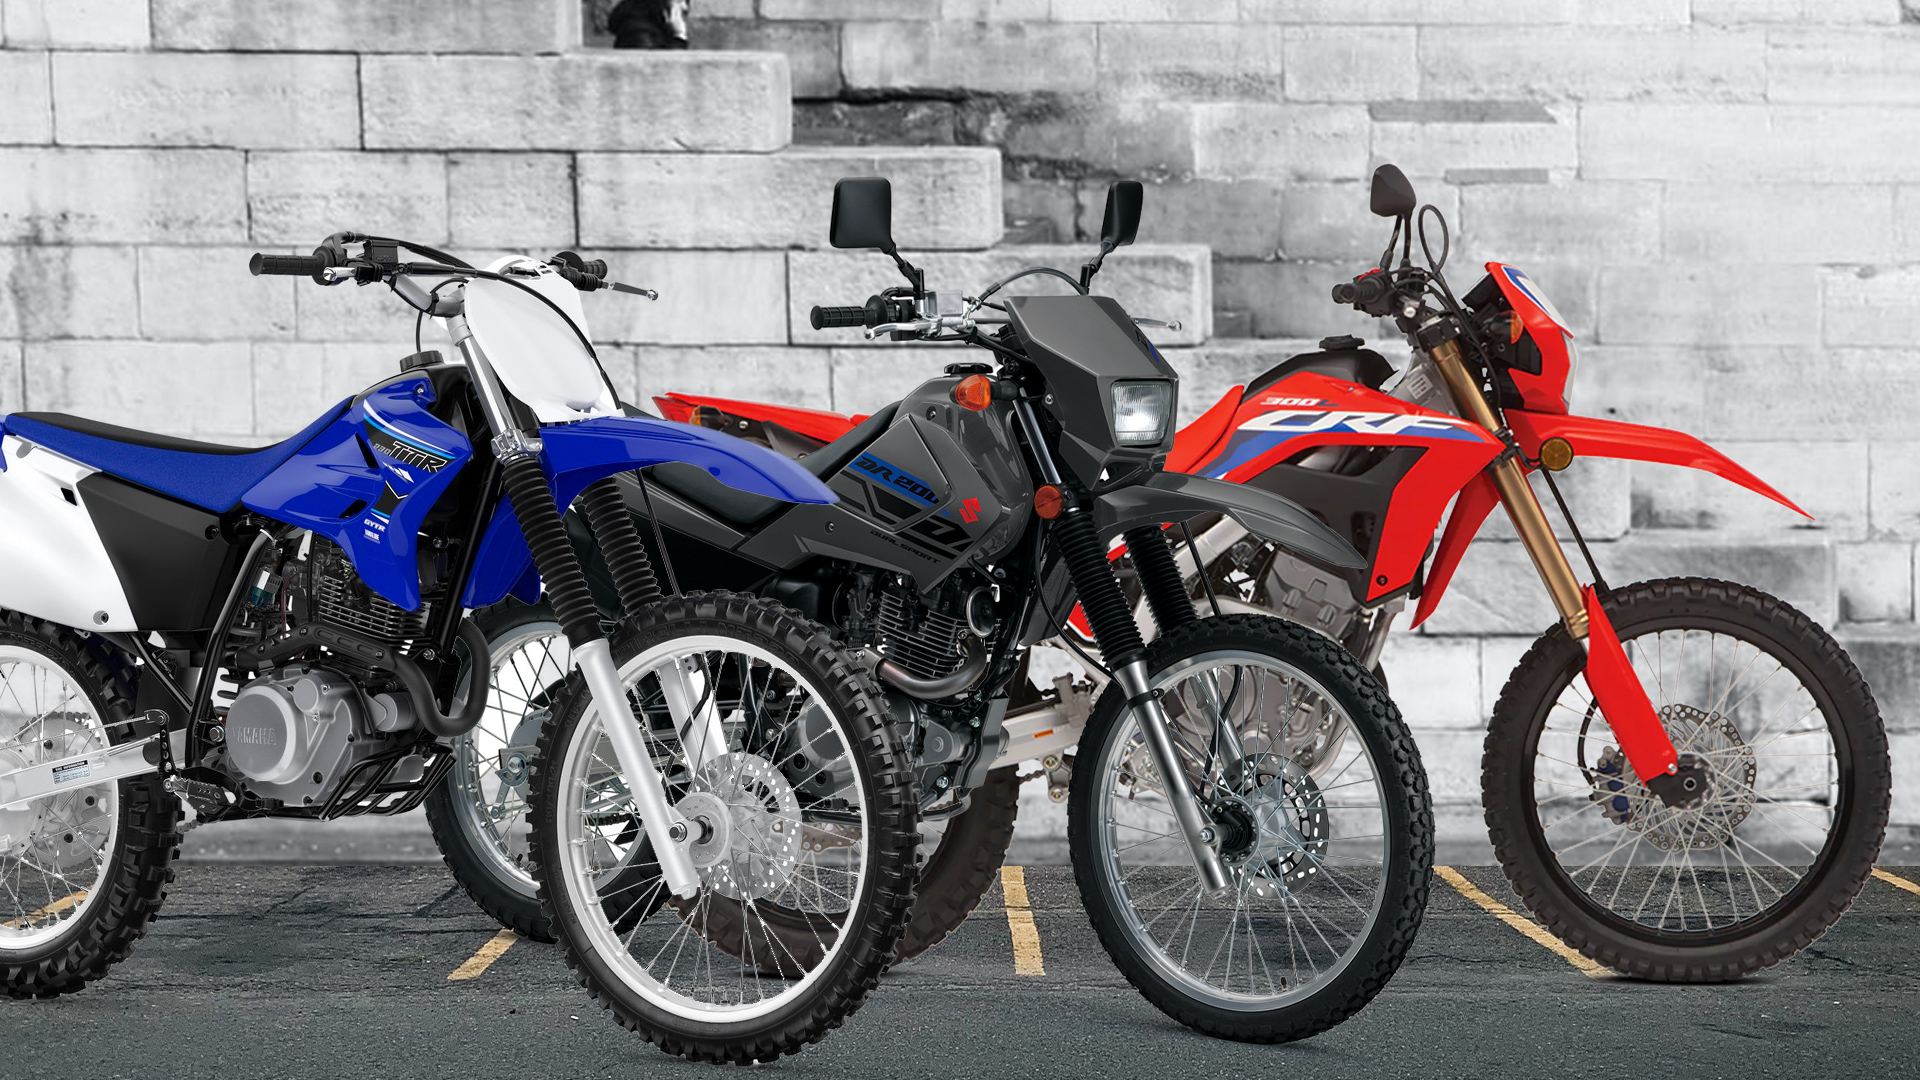 The Best Dirt Bikes & Dual Sports For Under $5,000